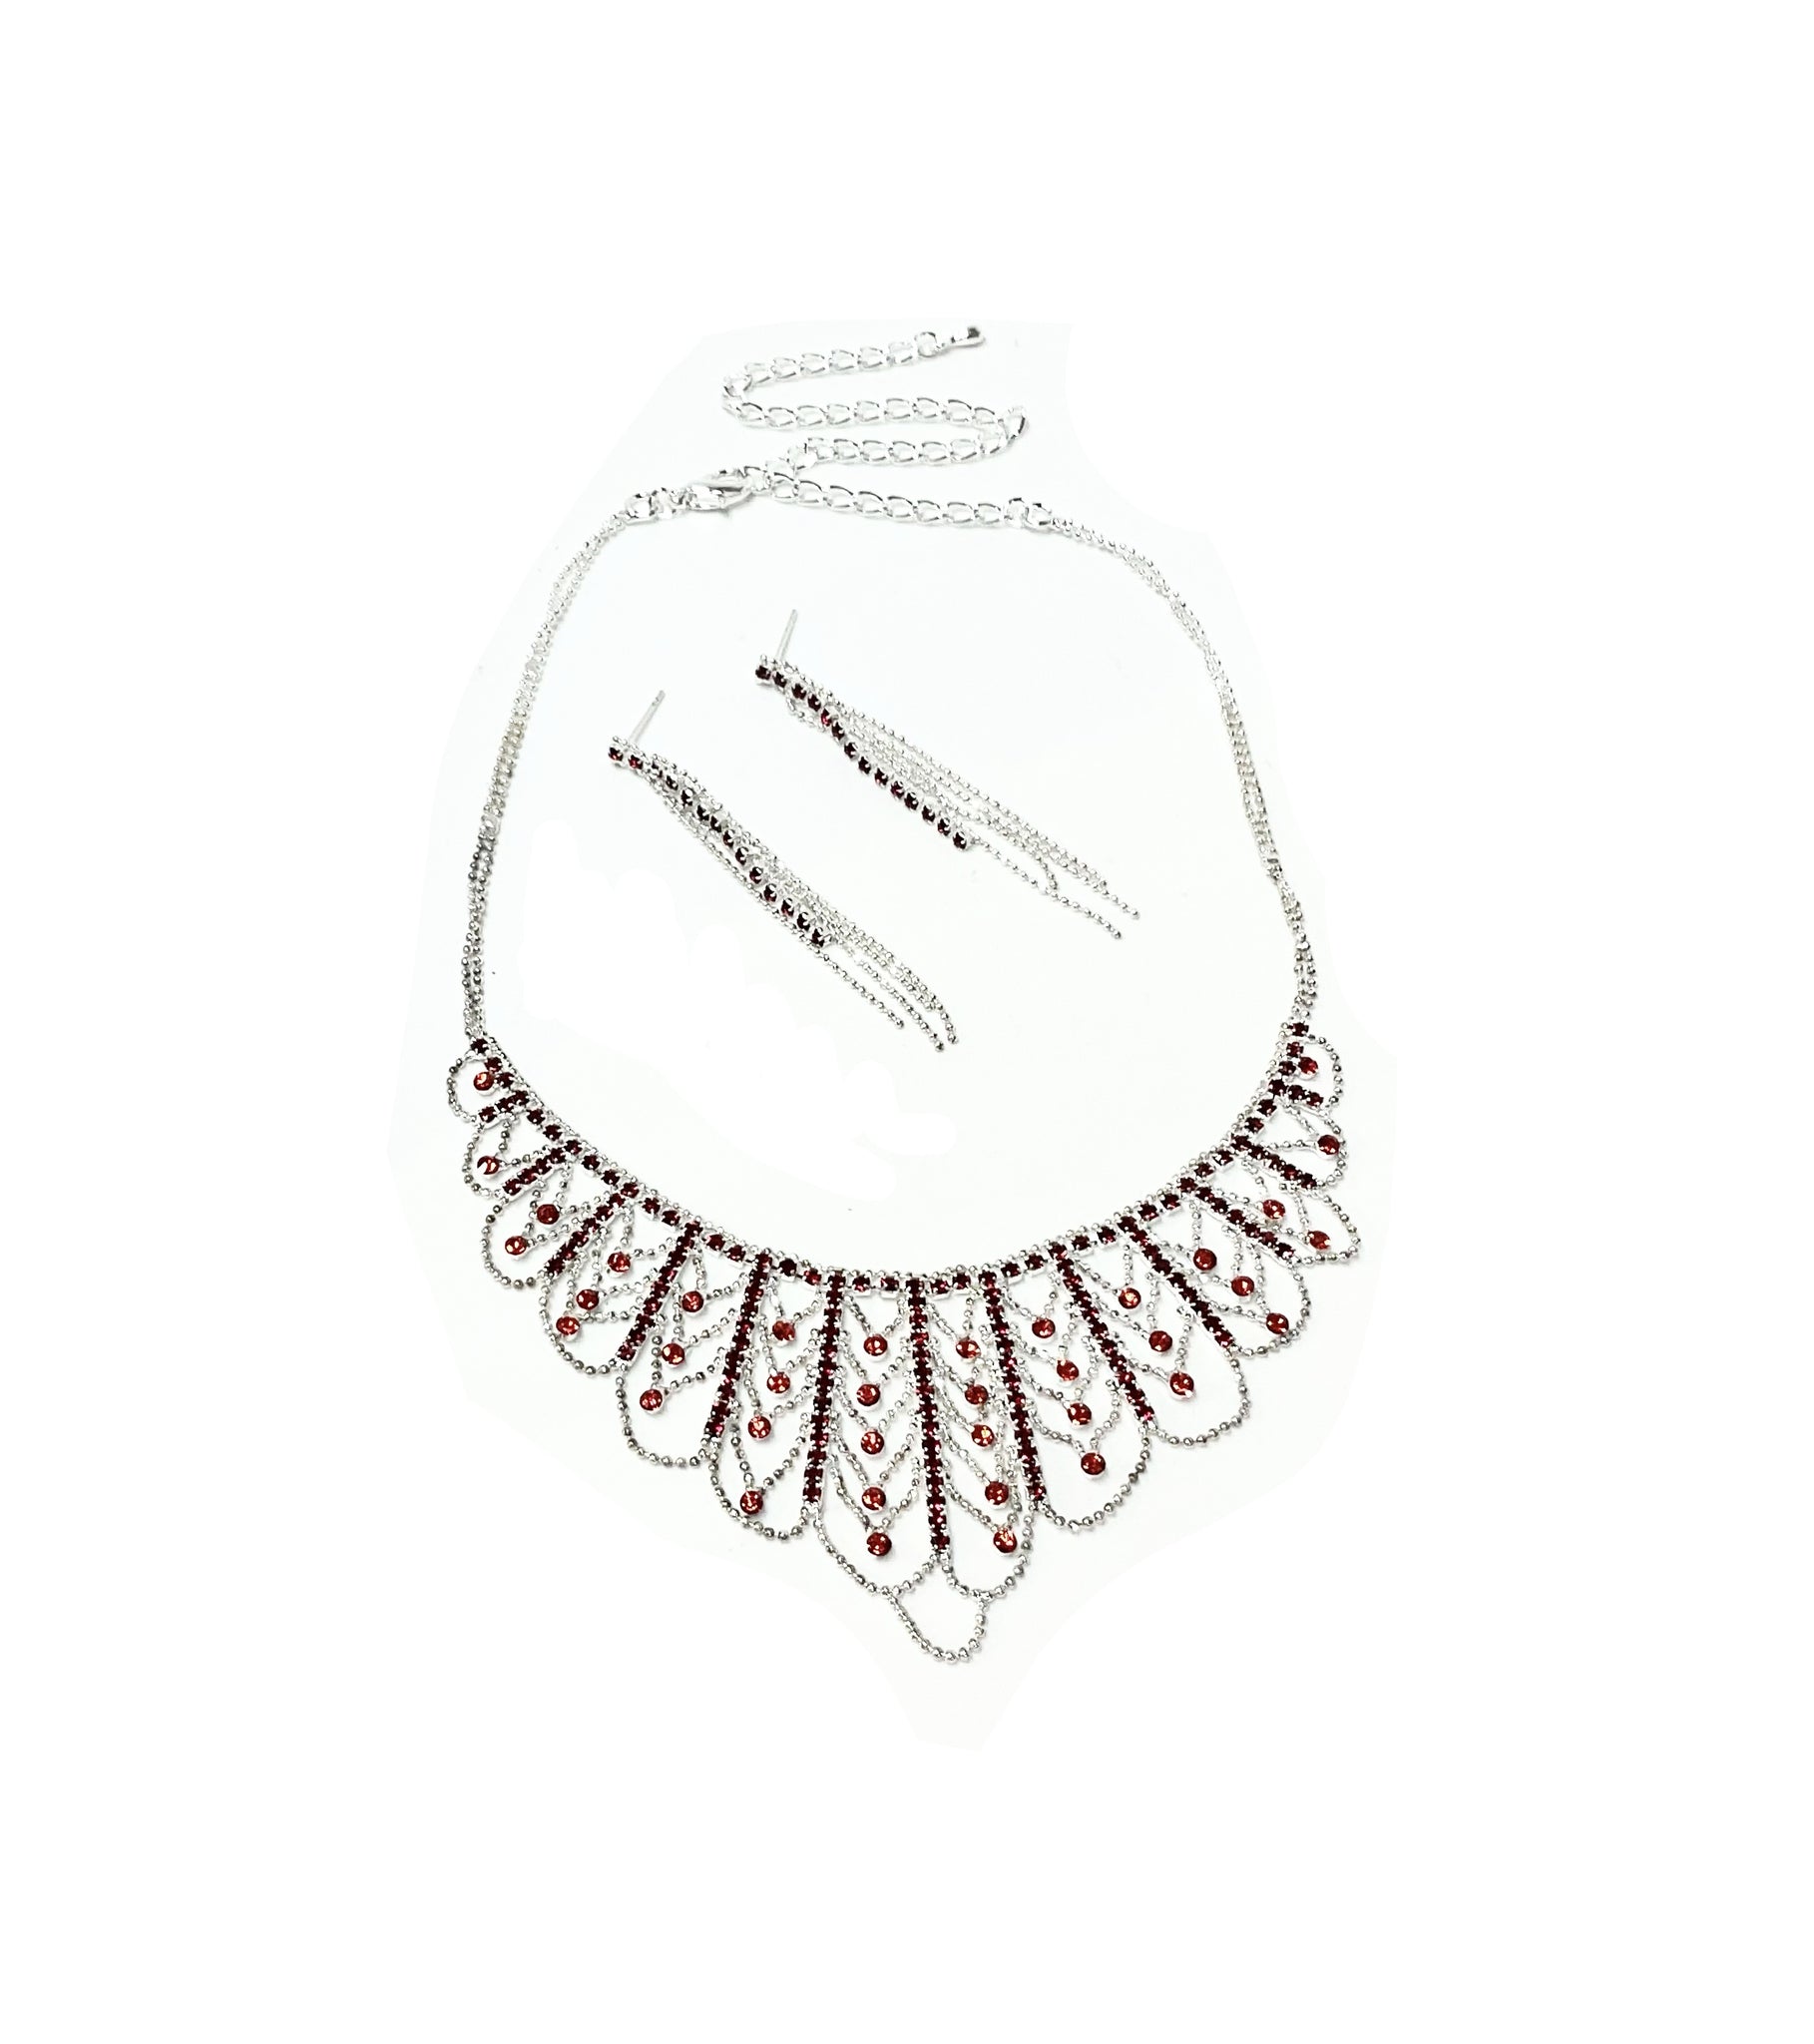 Net style Necklace and Earrings Set #66-14096RD